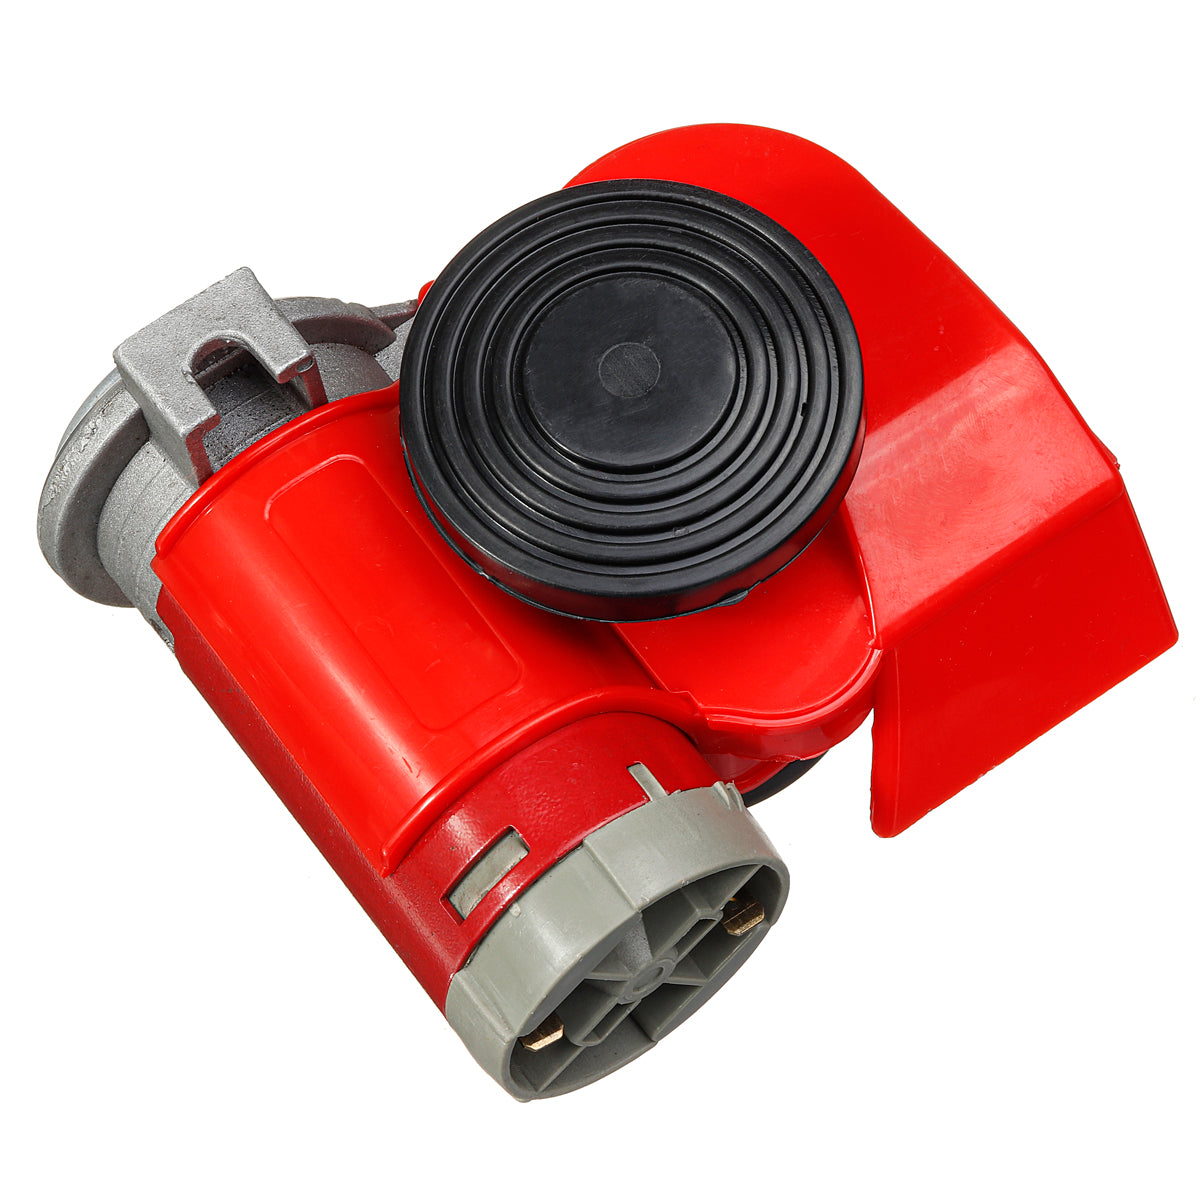 Firebrick 24V 139dB Dual Tone Electric Pump Trumpet Air Loud Horn Compact For Car Truck Boat Motorcycle